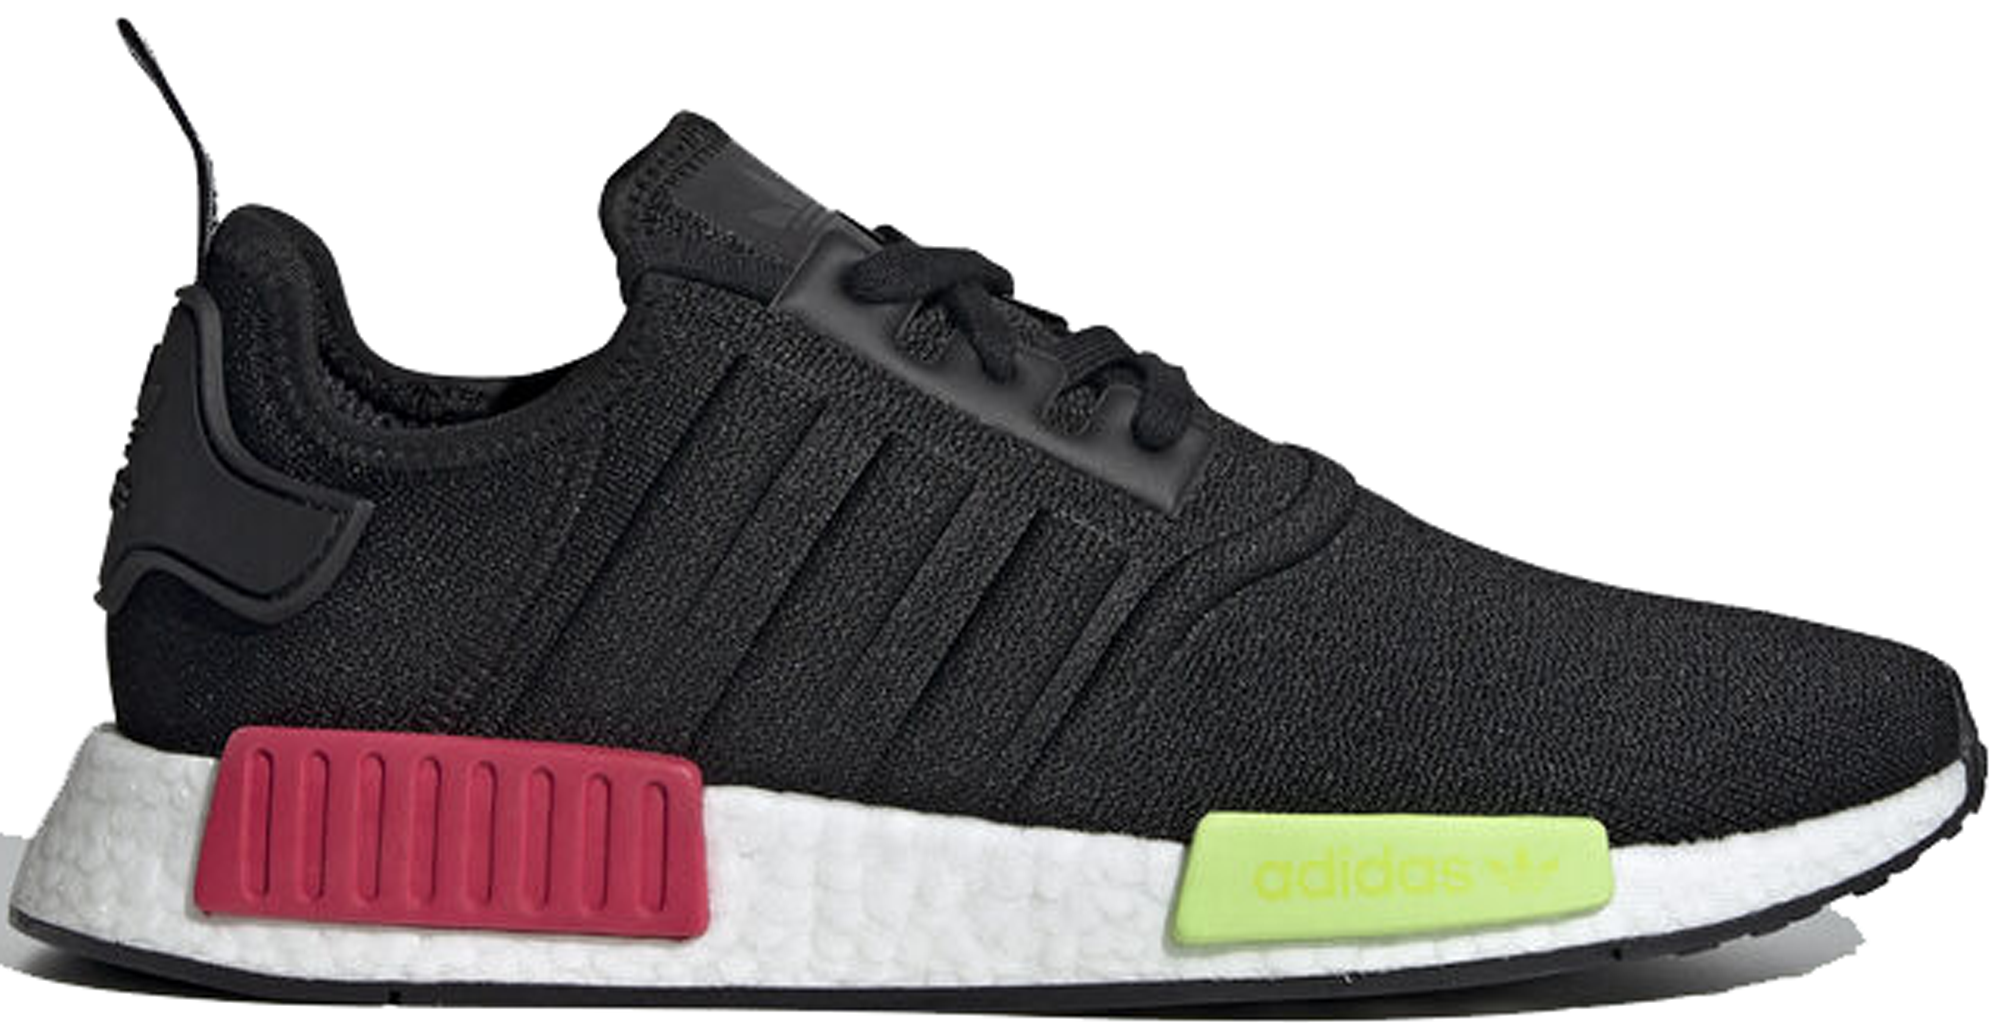 black and pink adidas nmd r1